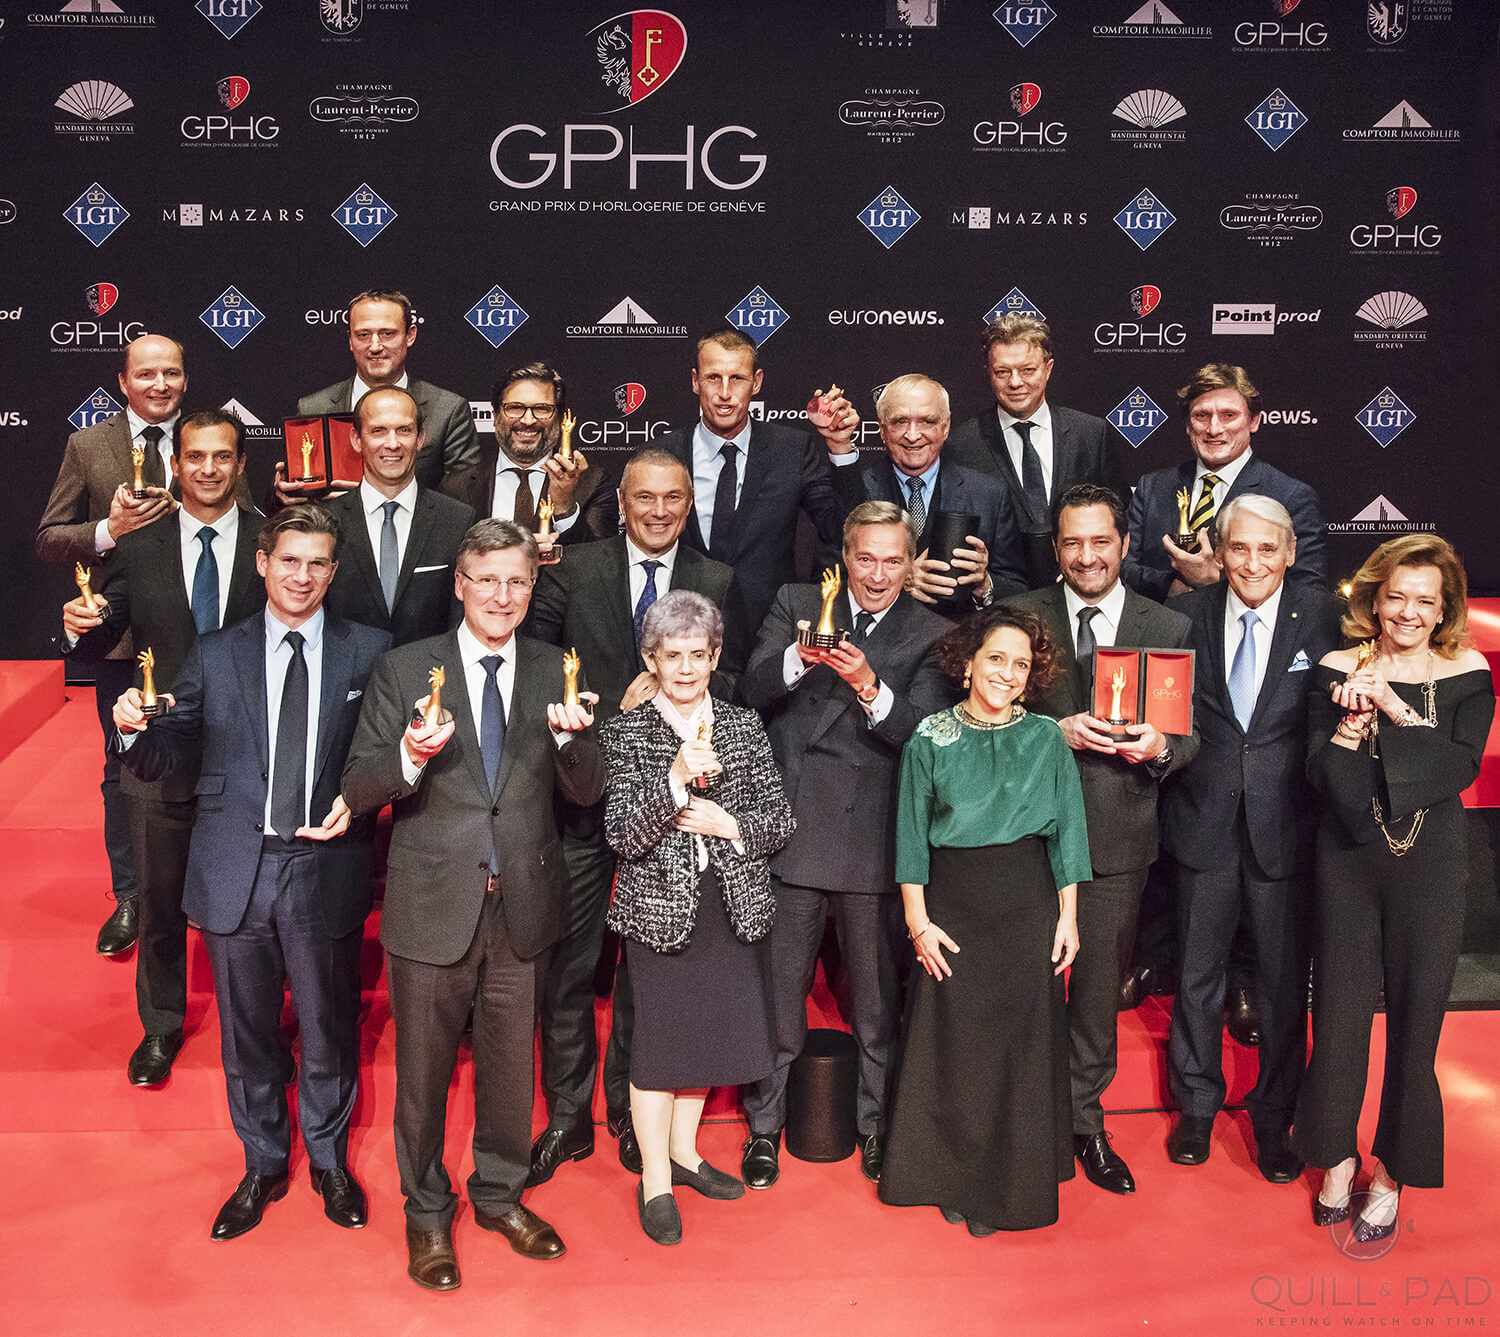 The laureates of 2017 GPHG award ceremony (photo courtesy Gregory Maillot/www.point-of-views.ch)